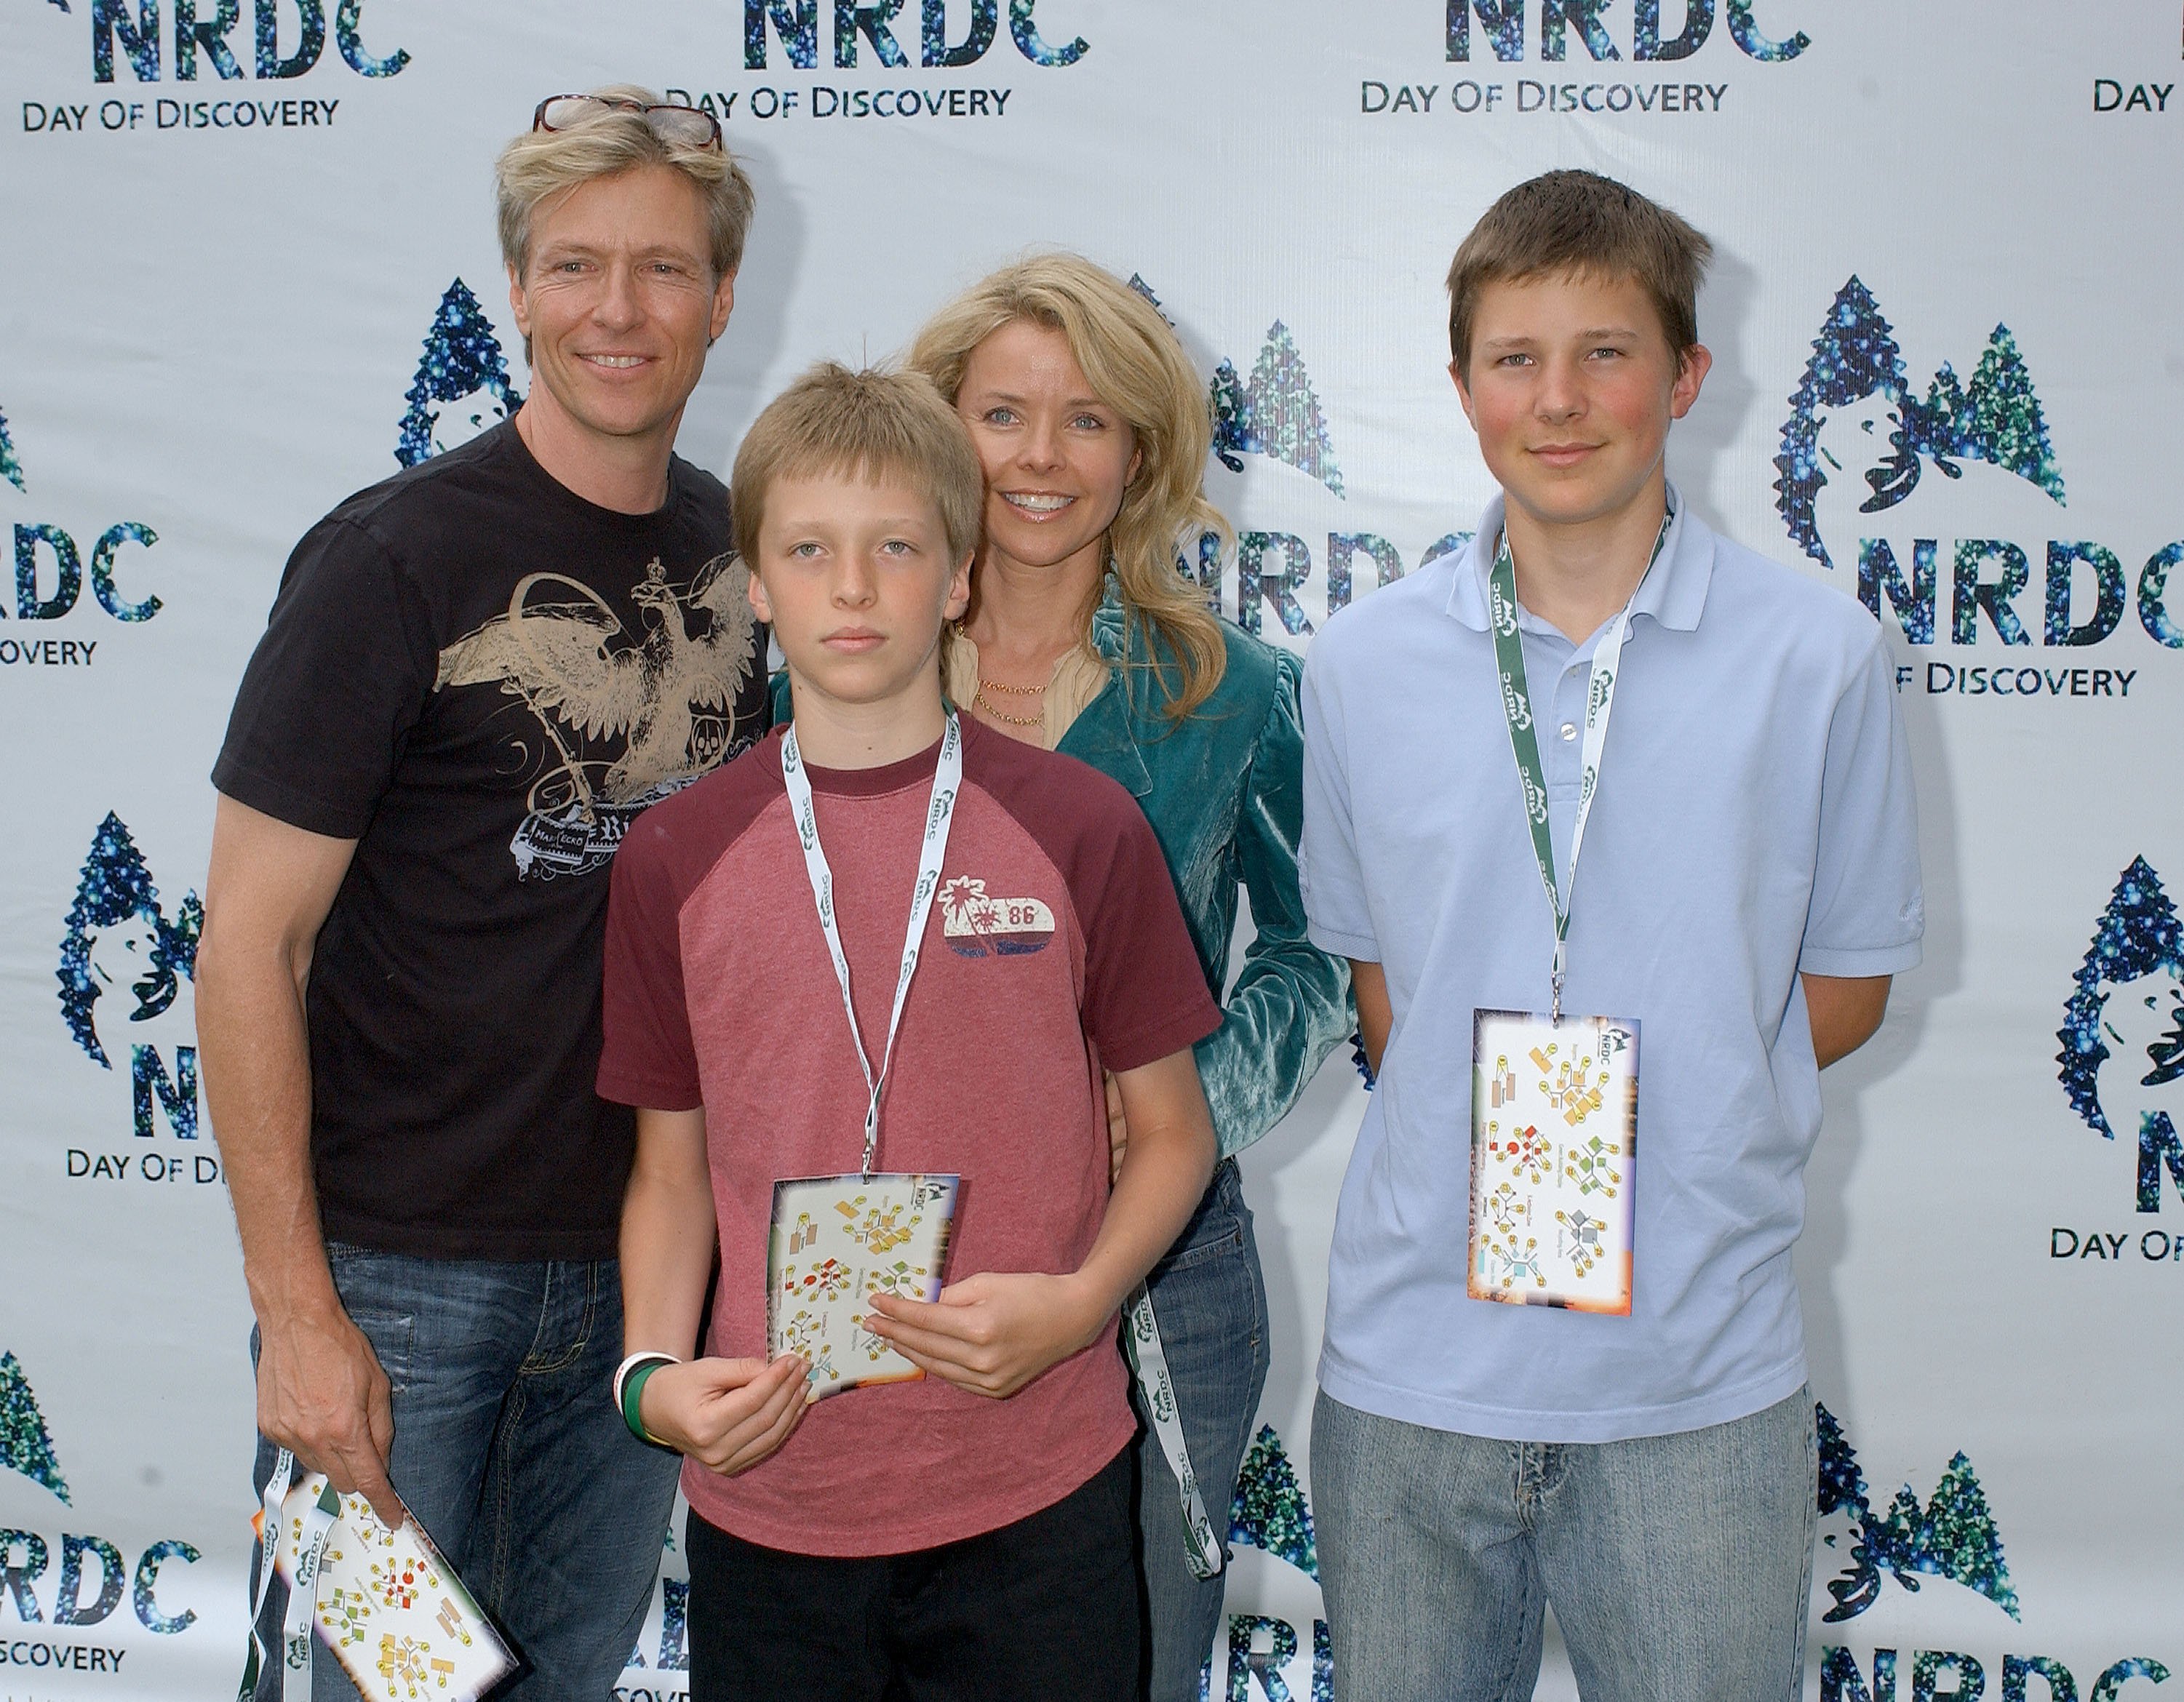 Jack Wagner and Kristina Wagner pose for a photo with their sons Harrison Wagner and Peter Wagner